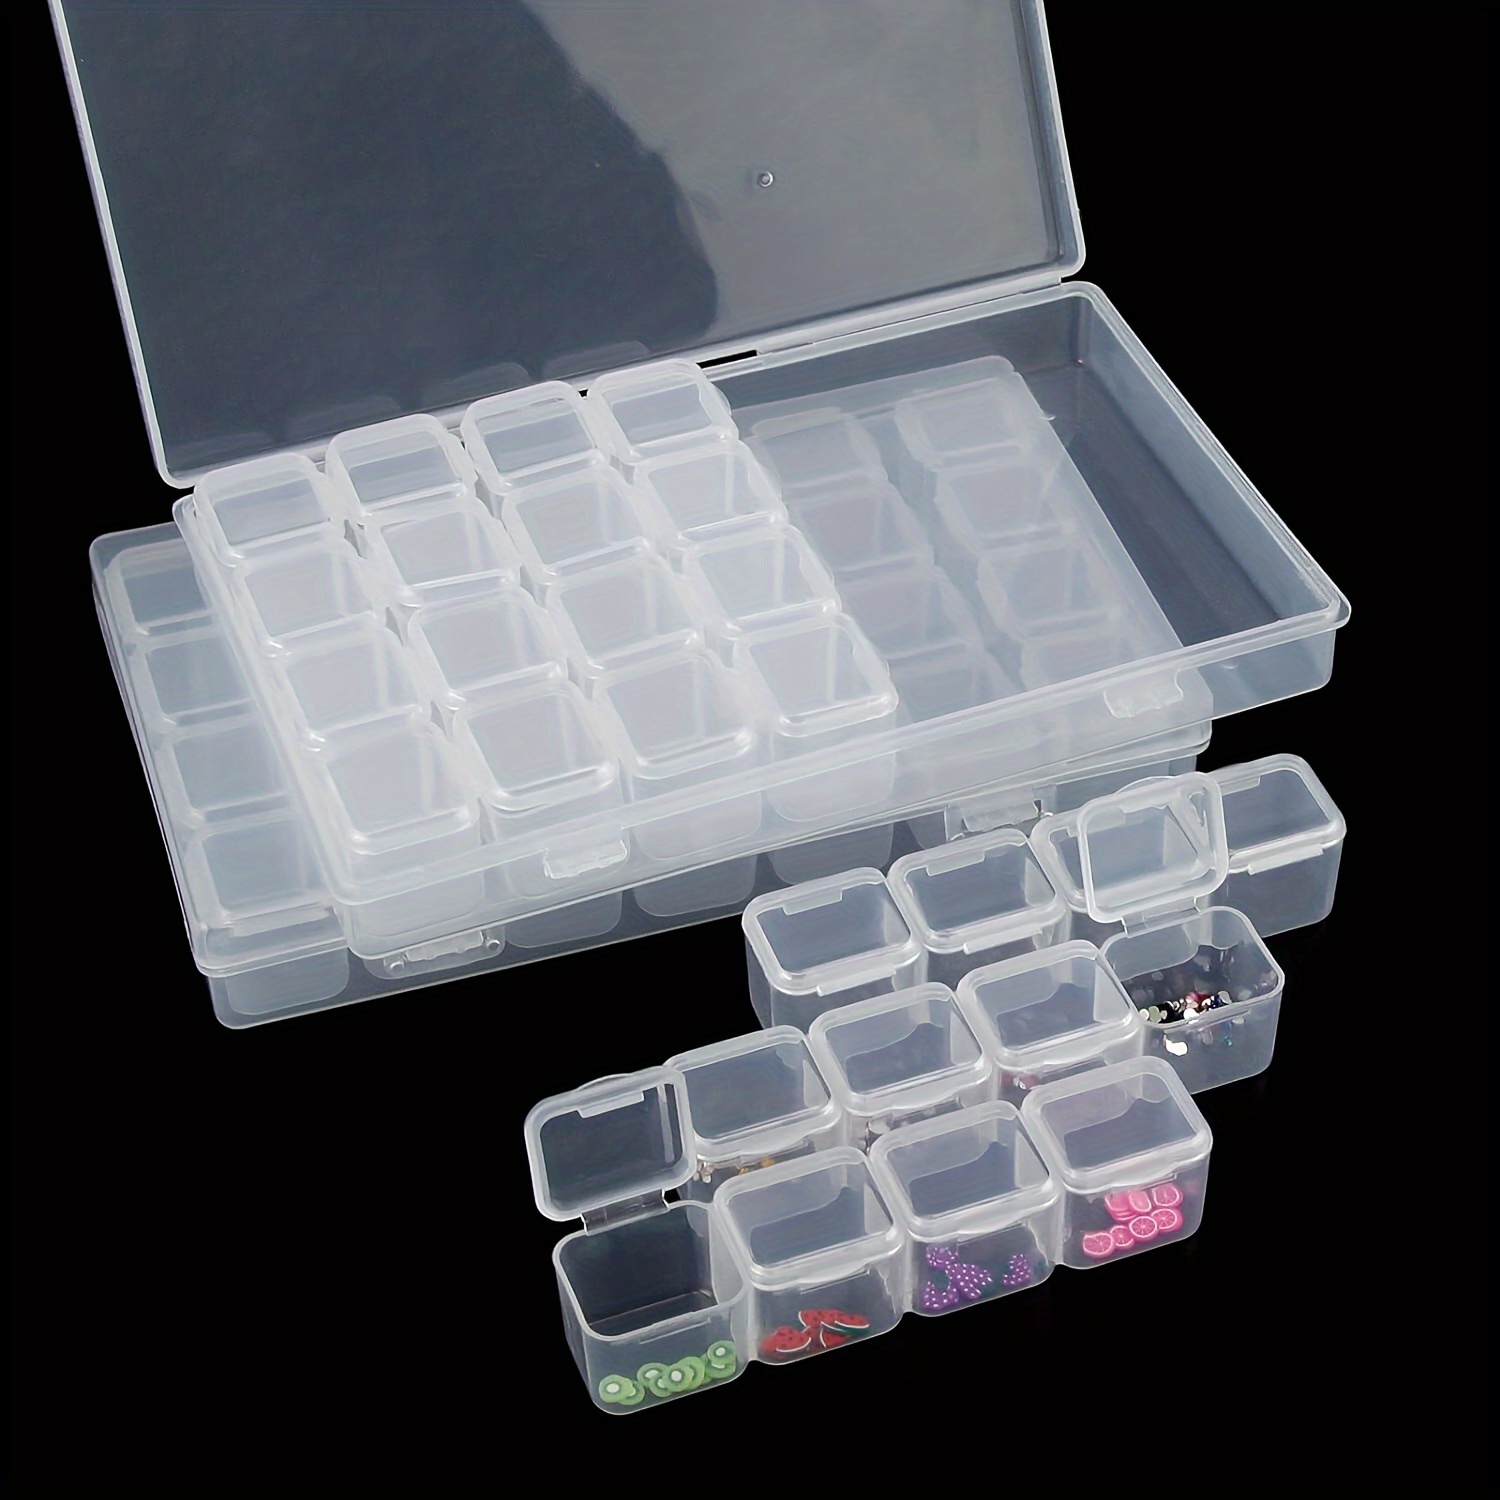 Large Clear Bead Organizer Box - 24 Slots Diamond Painting Storage  Containers, 5d Diamond Embroidery Accessories Bead Organizer Case With  Label Sticke